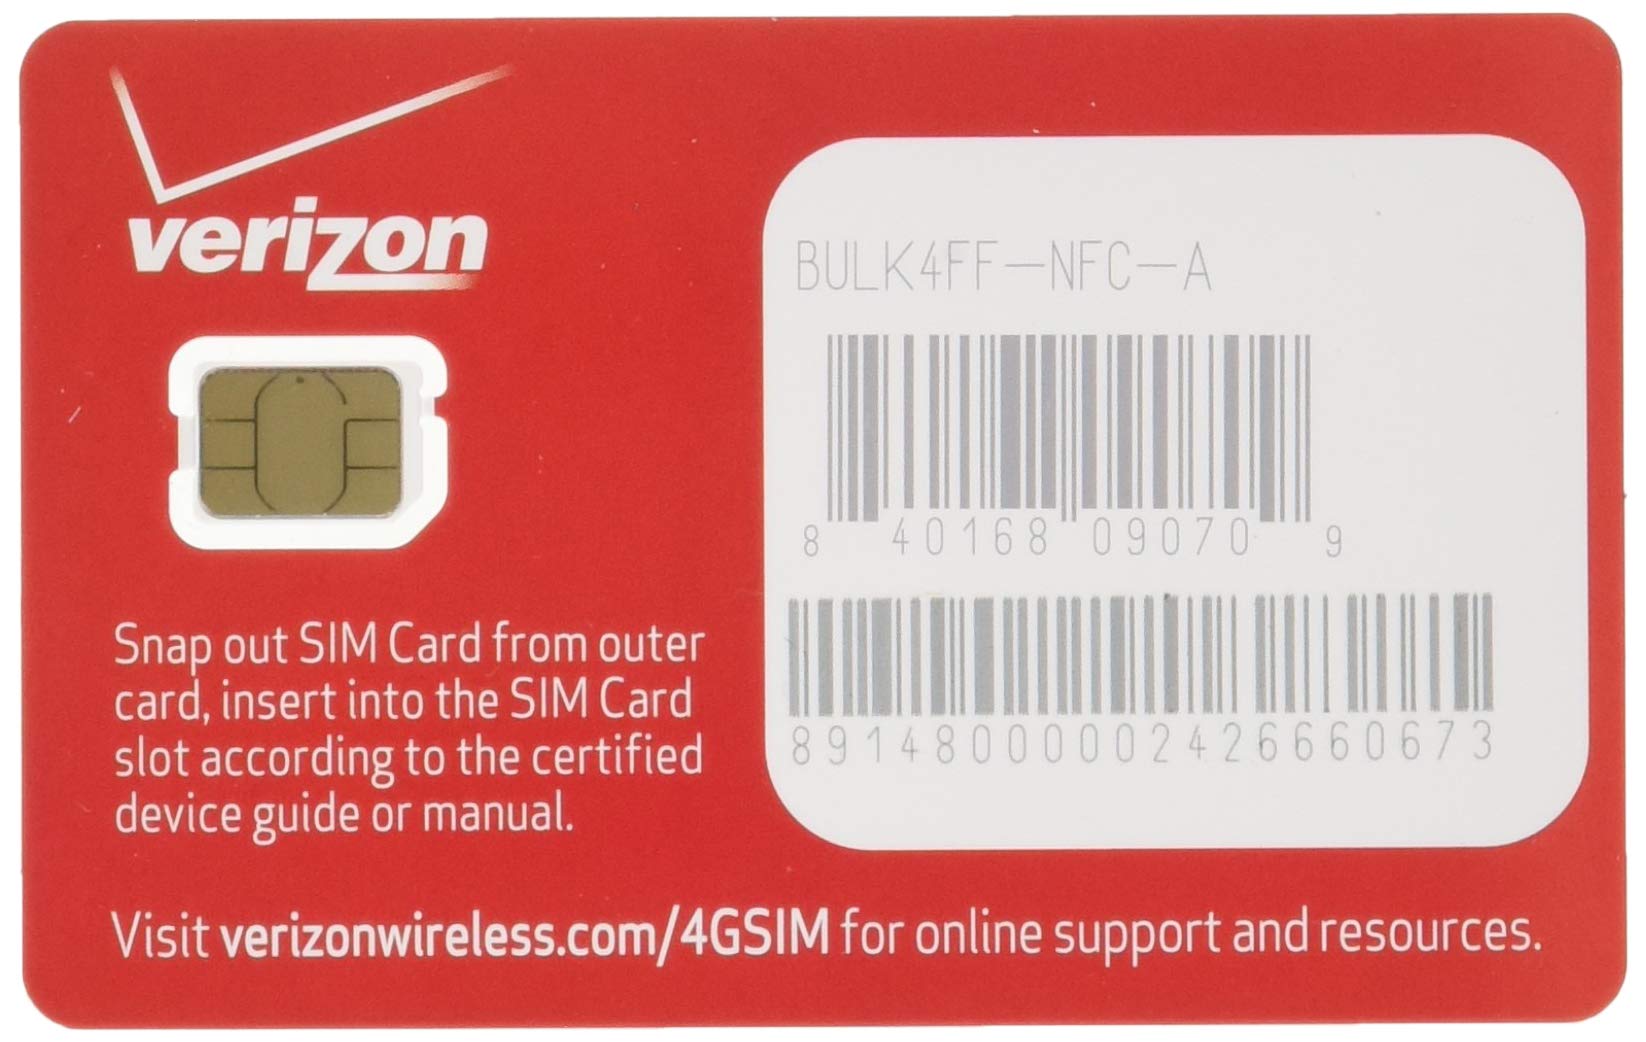 Verizon Wireless 4G LTE Nano SIM Card 4FF, Non-NFC, Only Compatible With iPhone (No Android)